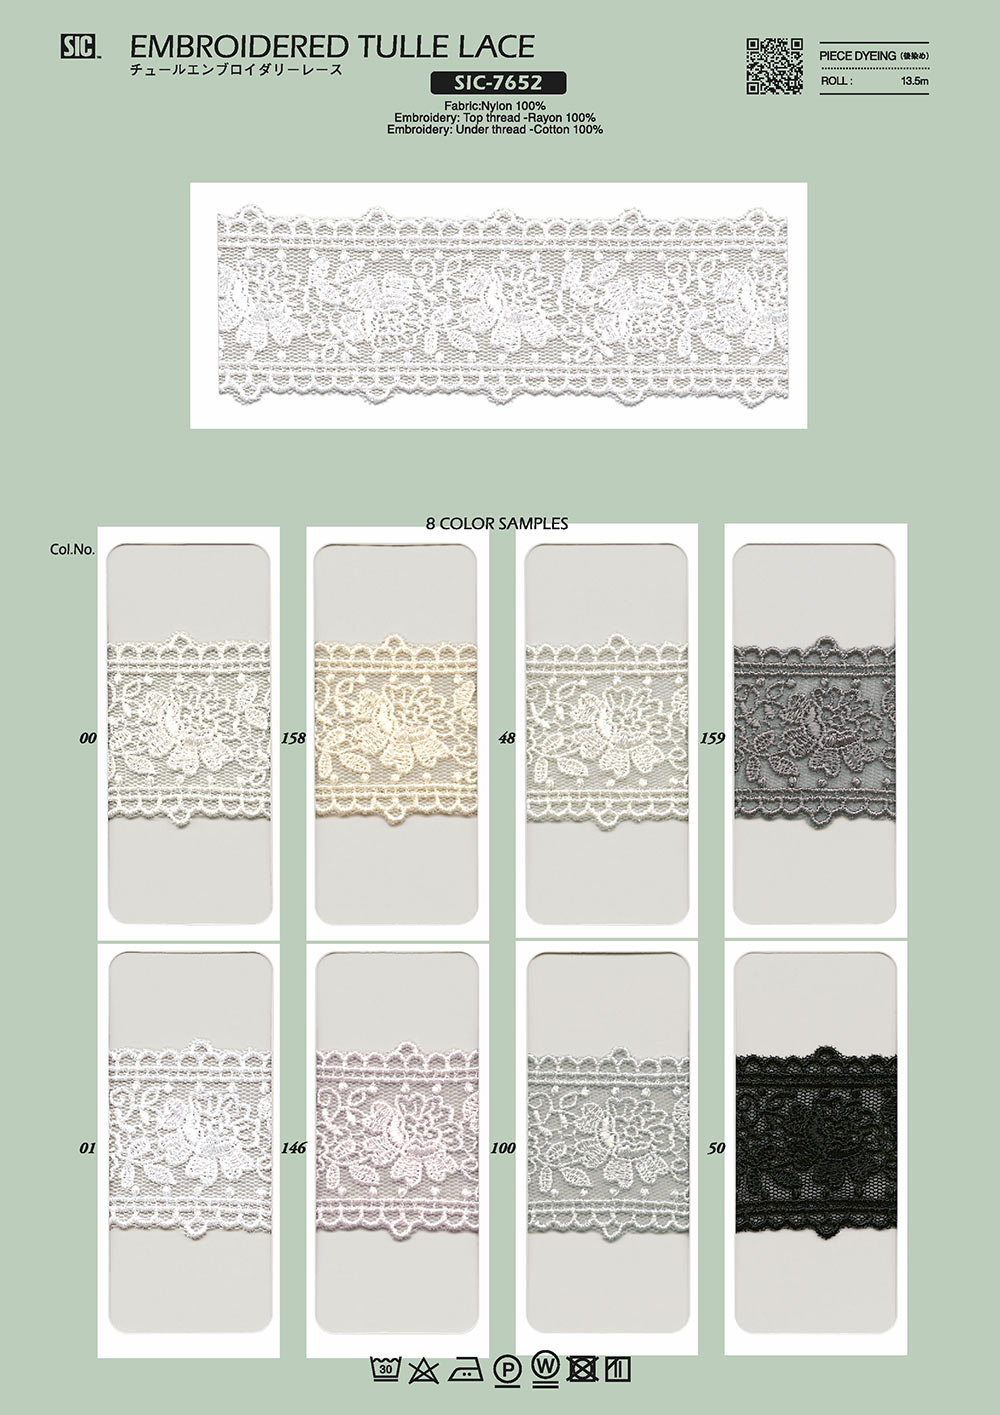 SIC-7652 Tulle Embroidery Lace/ 40mm SHINDO(SIC)